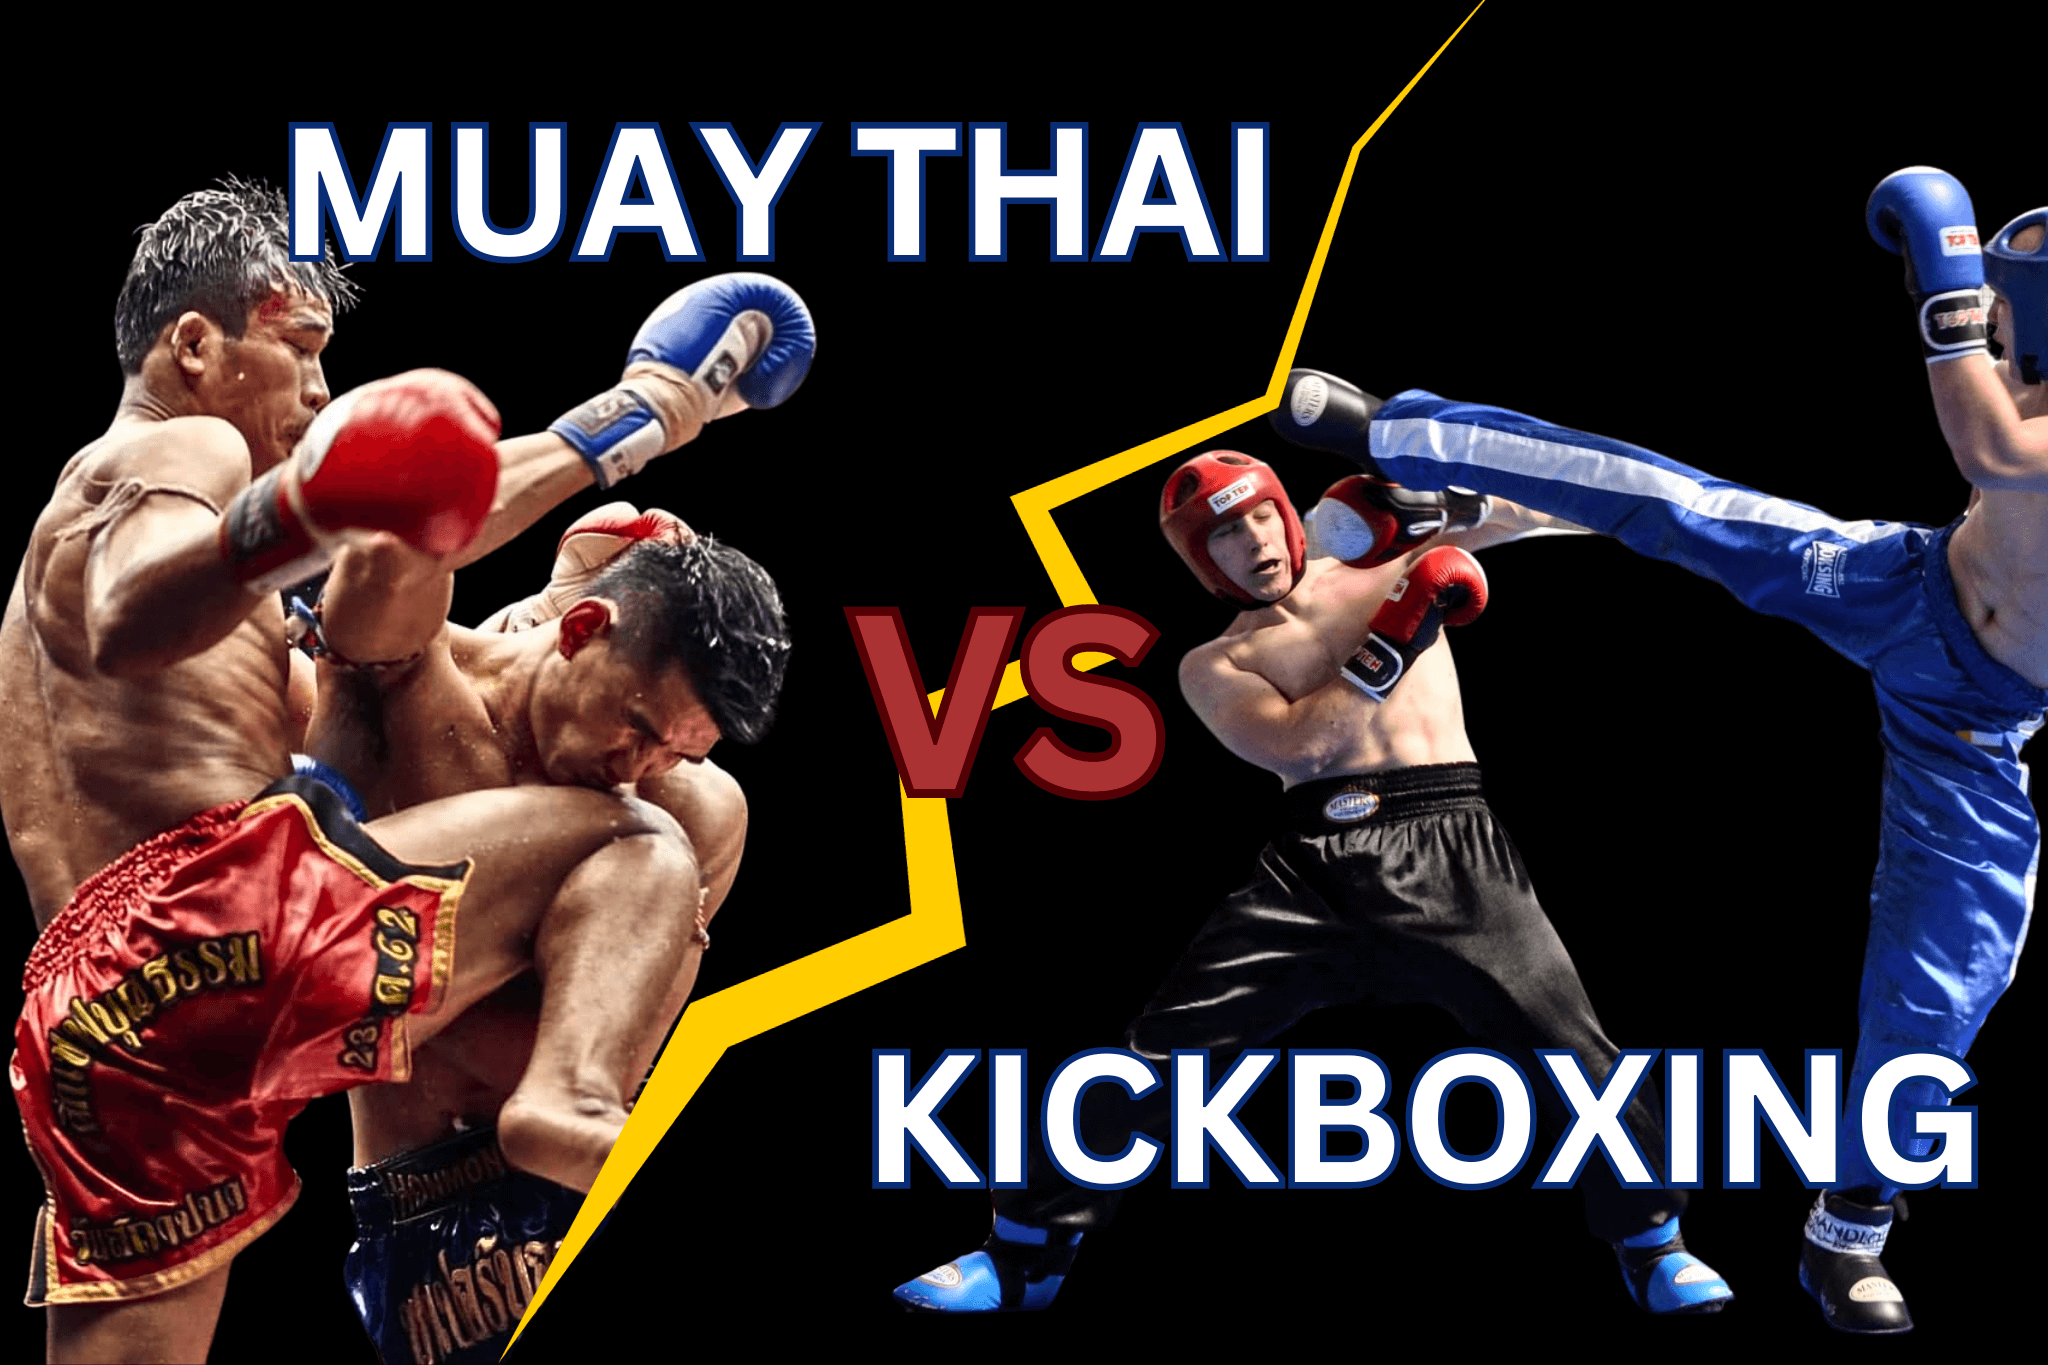 What’s the difference between the kickboxing and Muay Thai